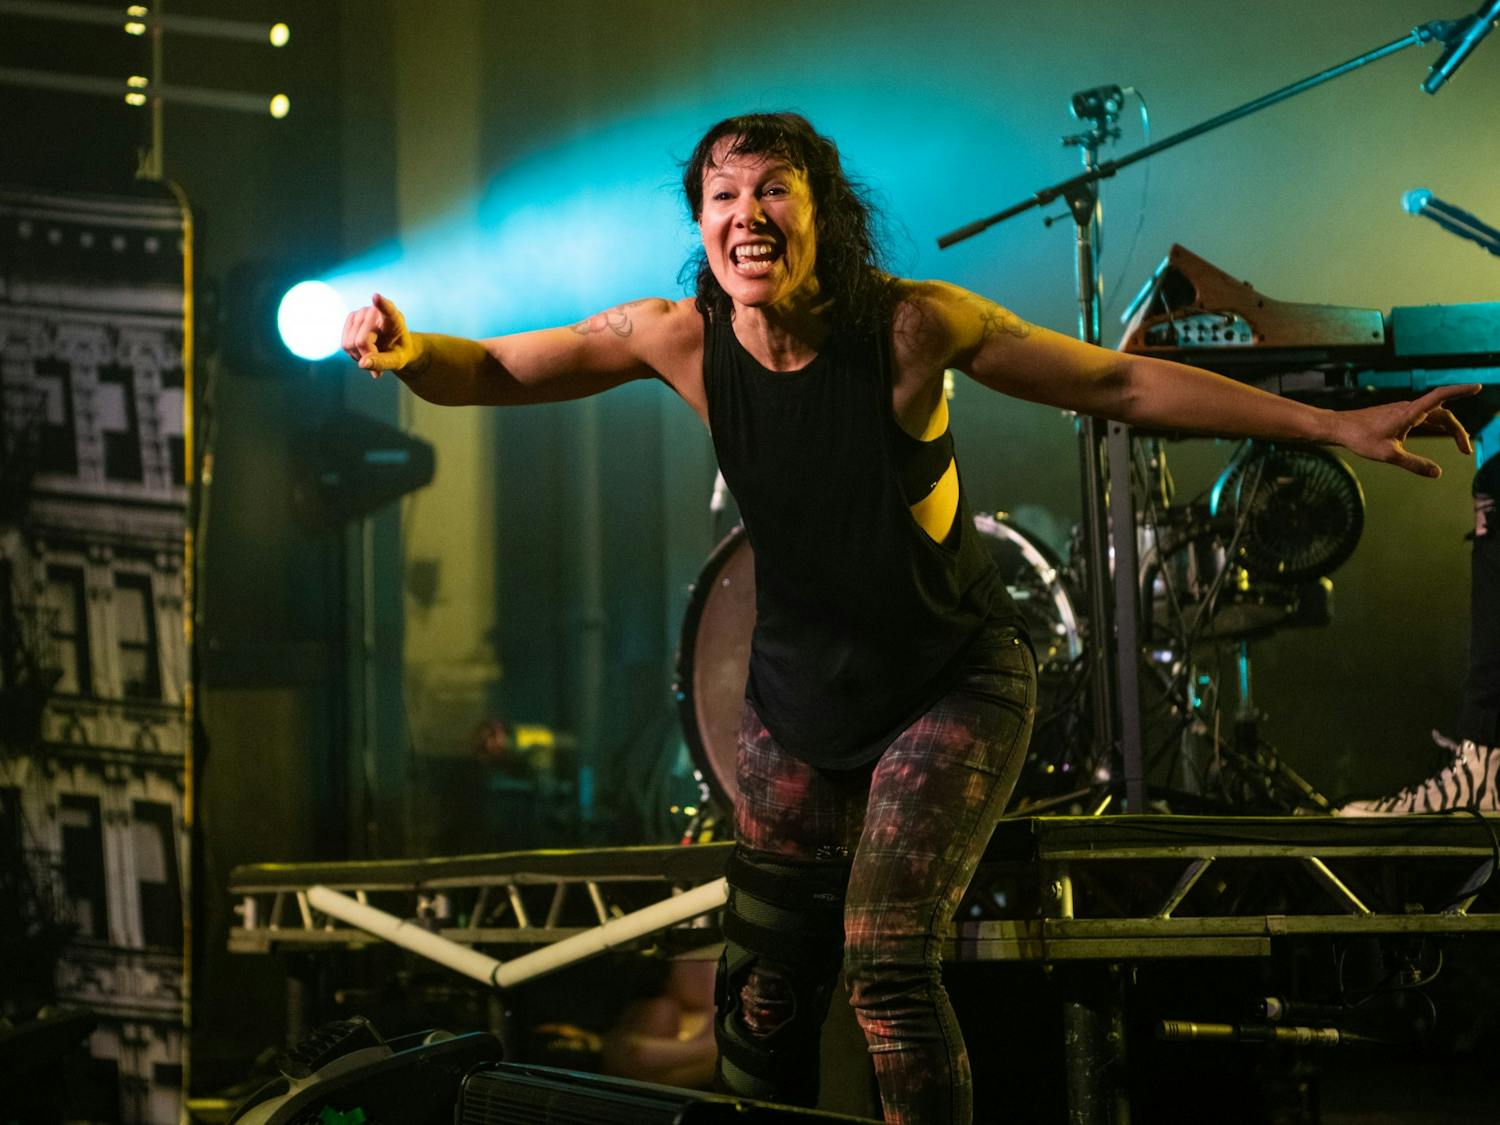 Kim Schifino points at a fan and lip syncs at the November Matt and Kim concert in Columbia. The pair plays tracks between songs where they interact with the crowd.